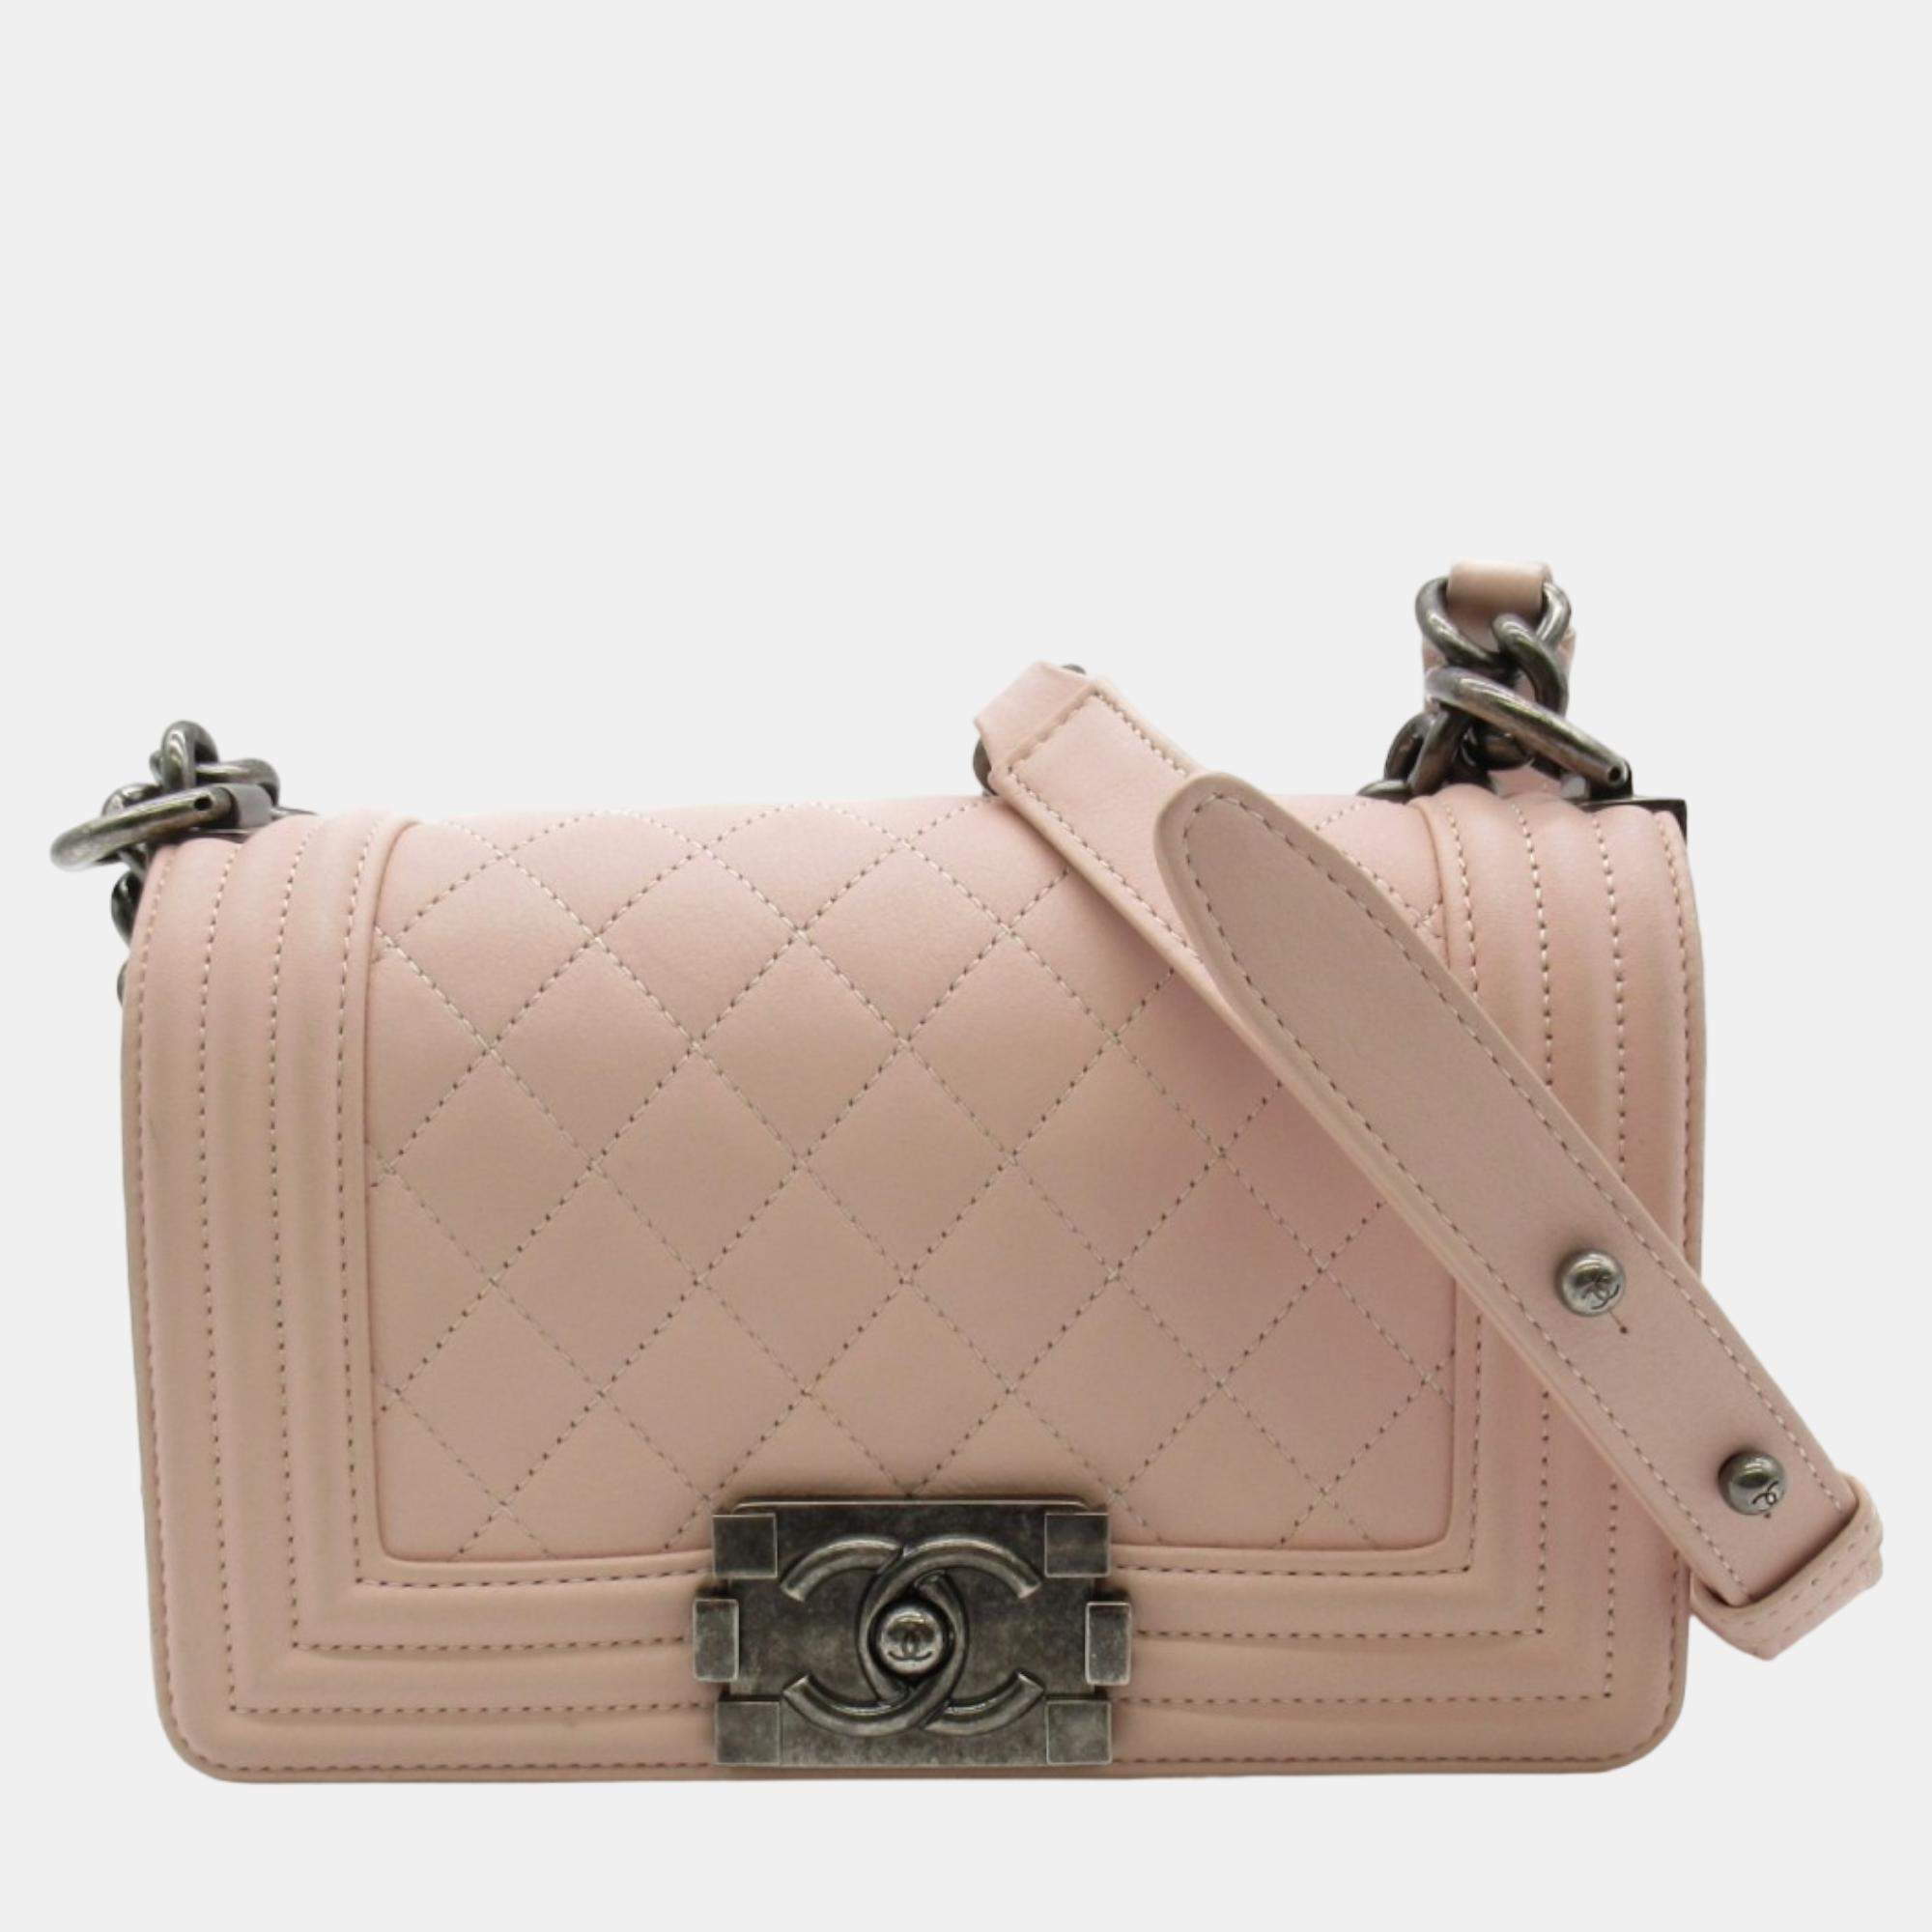 Chanel Pink Quilted Caviar Classic CC Woc Clutch Bag